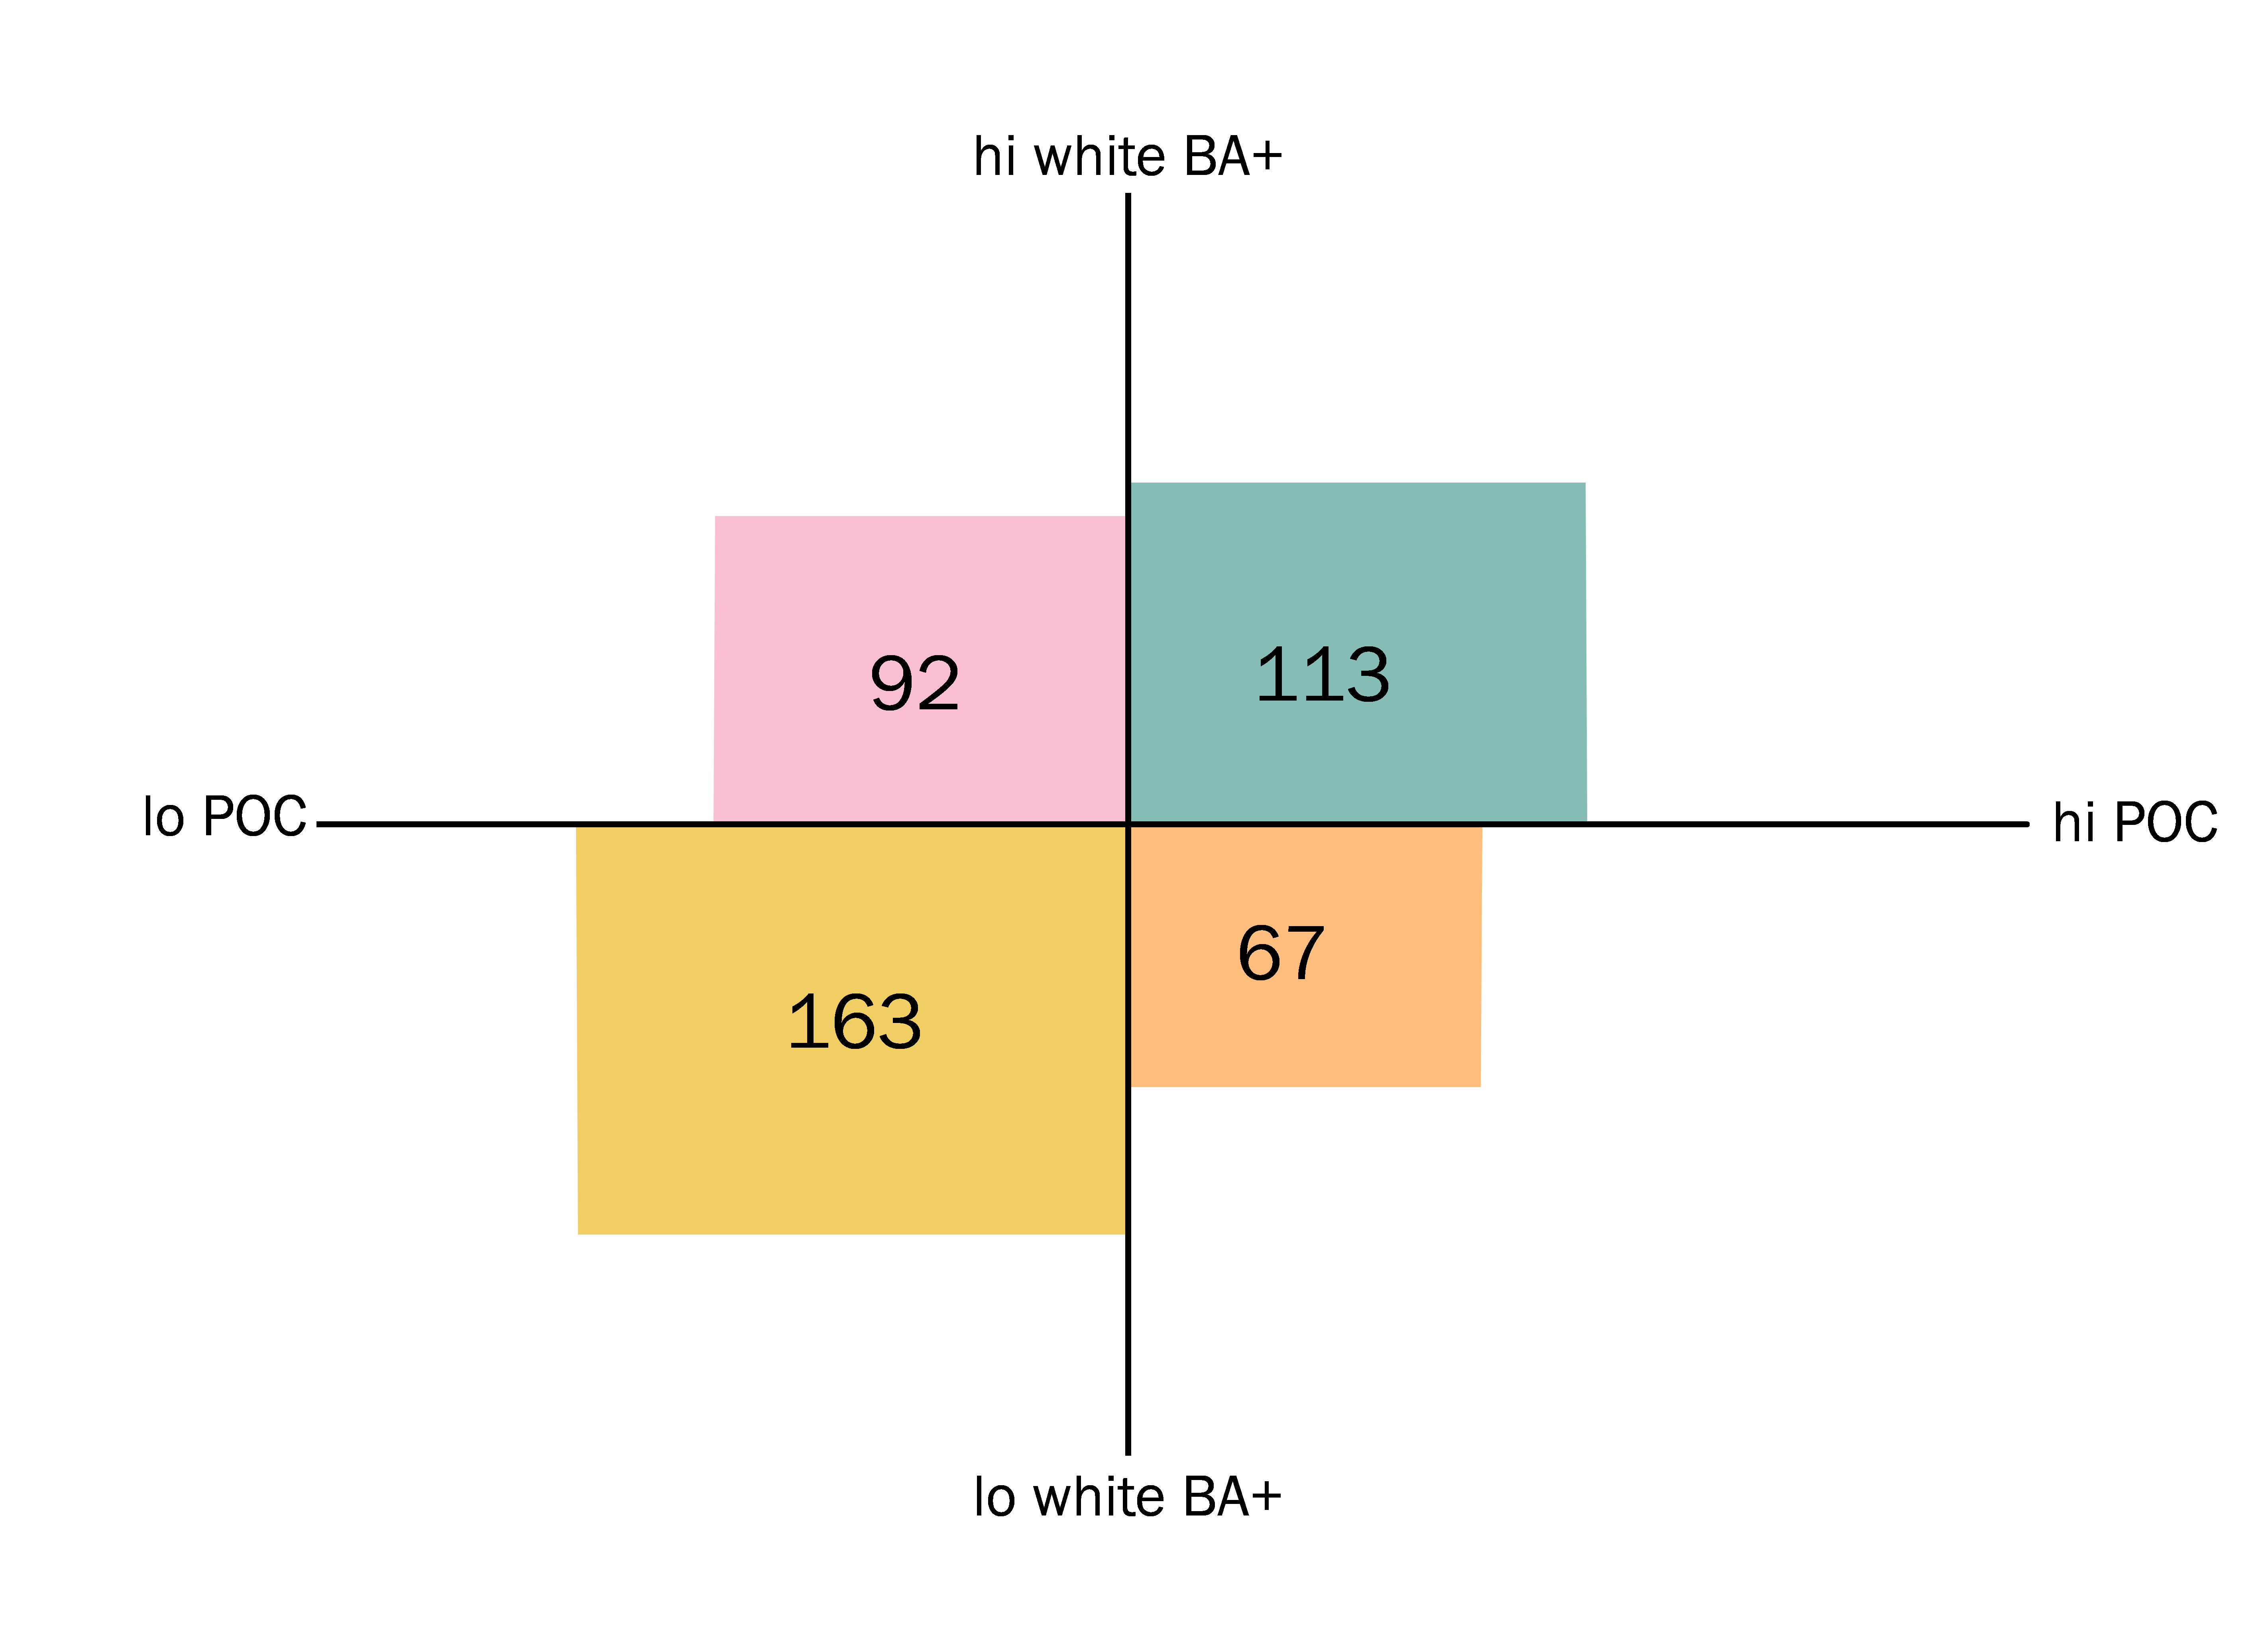 in Figure 2, there are far more districts that are at either end of the spectrum – relatively more diverse with a highly educated white population, or less diverse with a less educated white population – than there are in between (i.e., relatively more diverse with a less educated white population or vice versa).